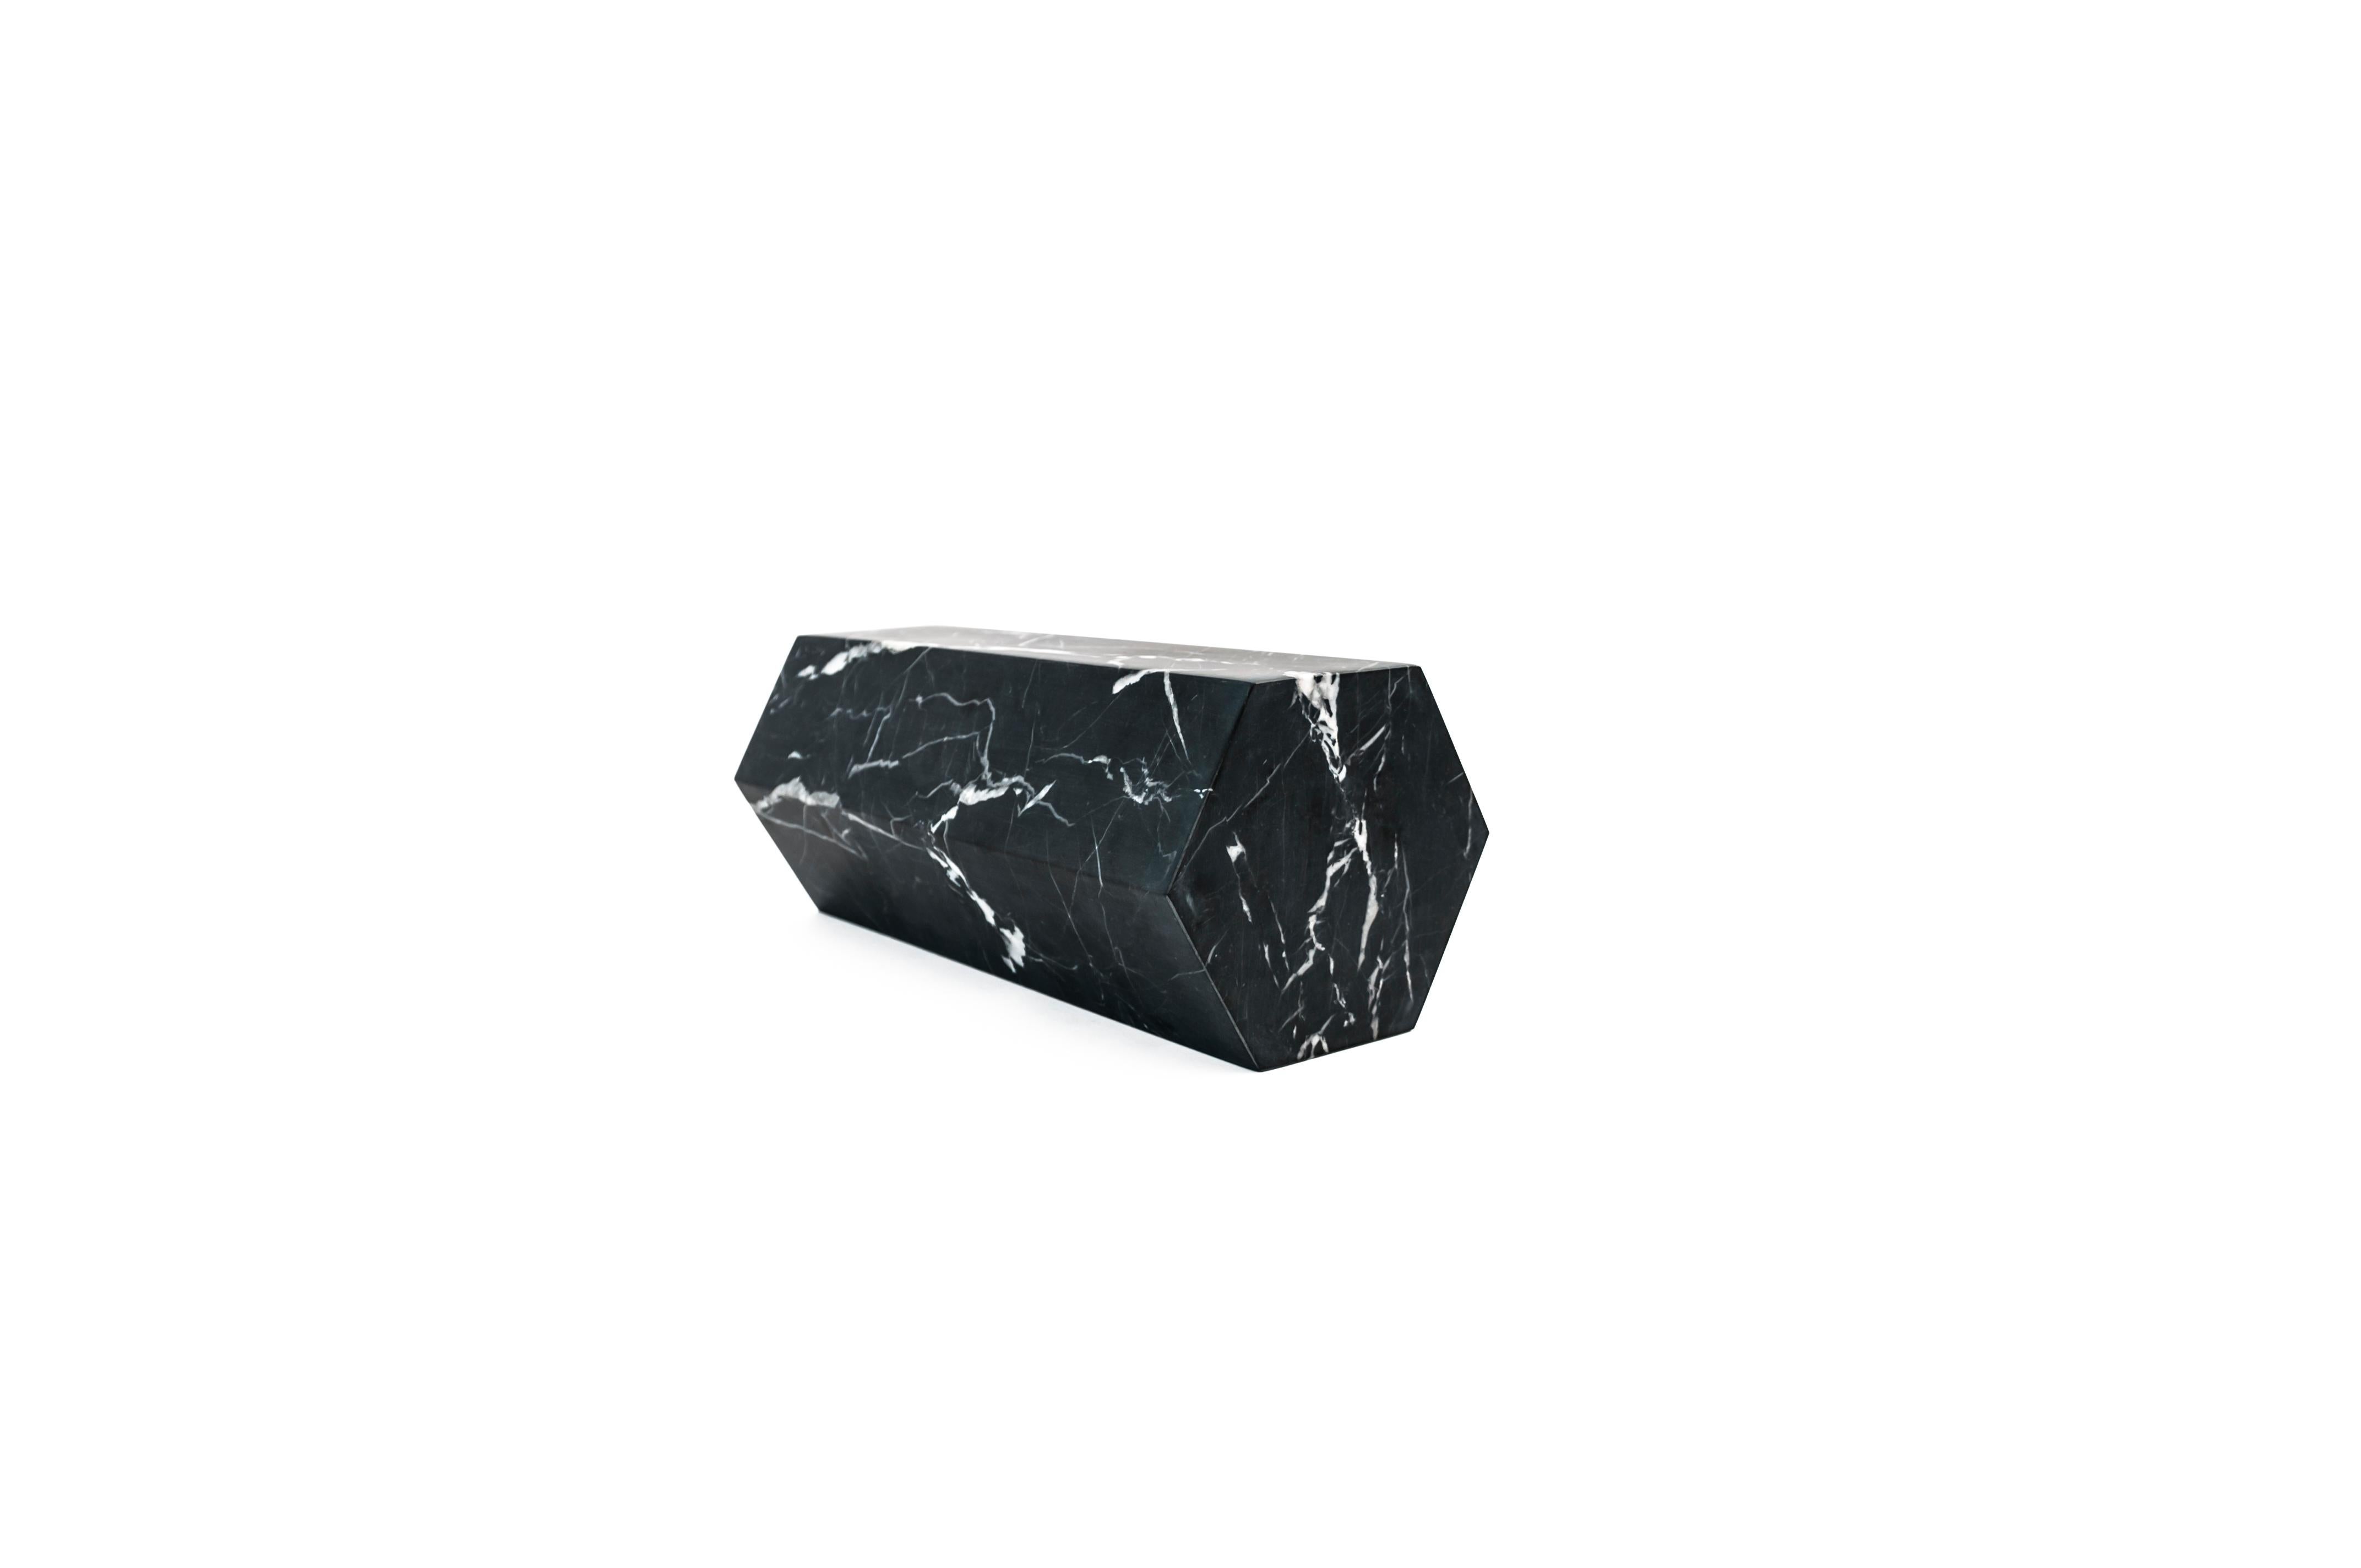 Handmade Big Decorative Prism / Bookend in Satin Black Marquina Marble In New Condition For Sale In Carrara, IT